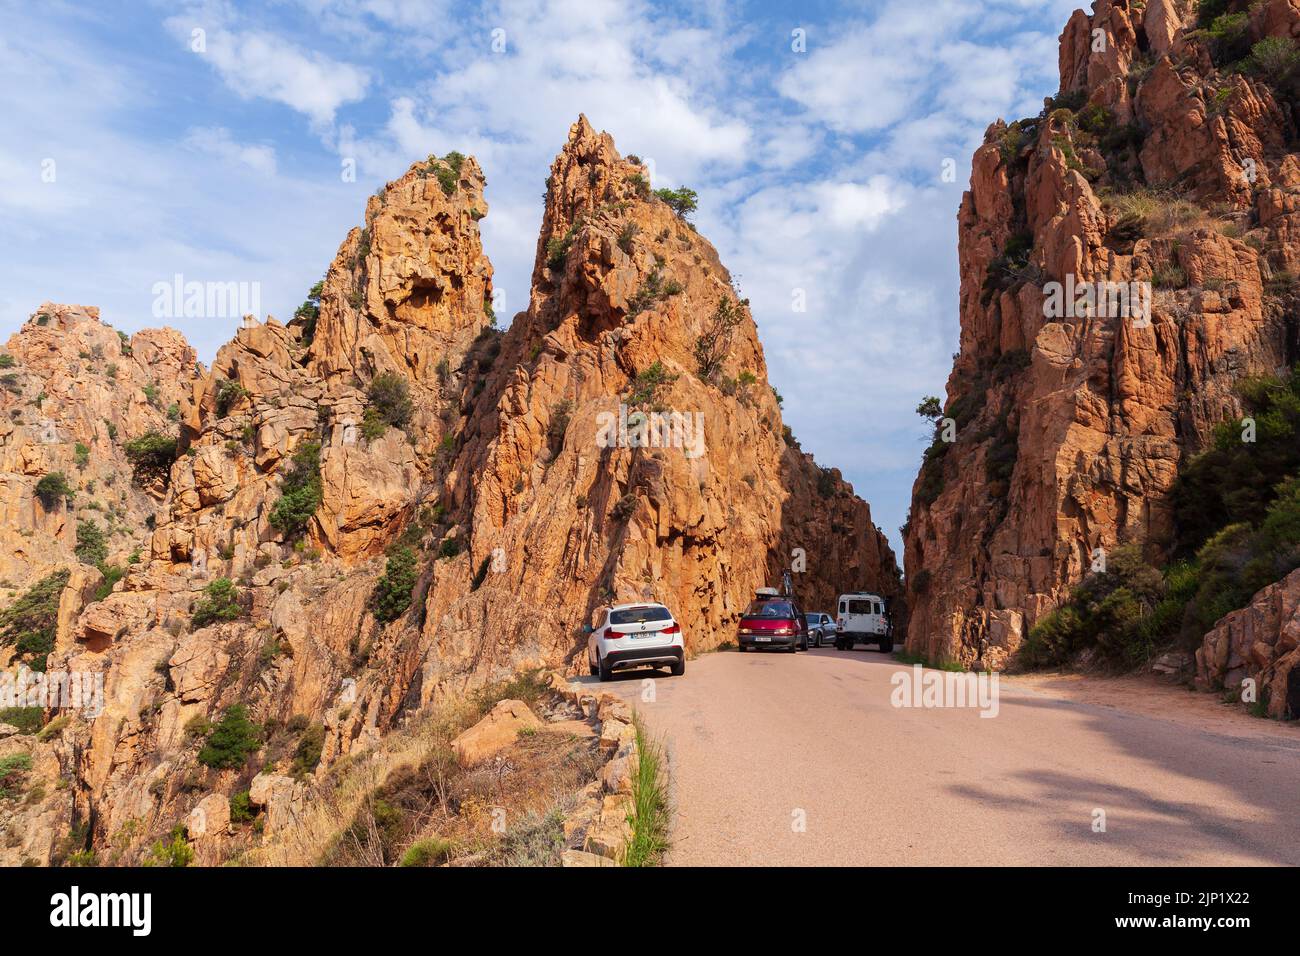 Corsica, France - August 23, 2018: Cars are on the narrow mountain road at the Calanques de Piana. Corsican landscape with rocks located in Piana, bet Stock Photo